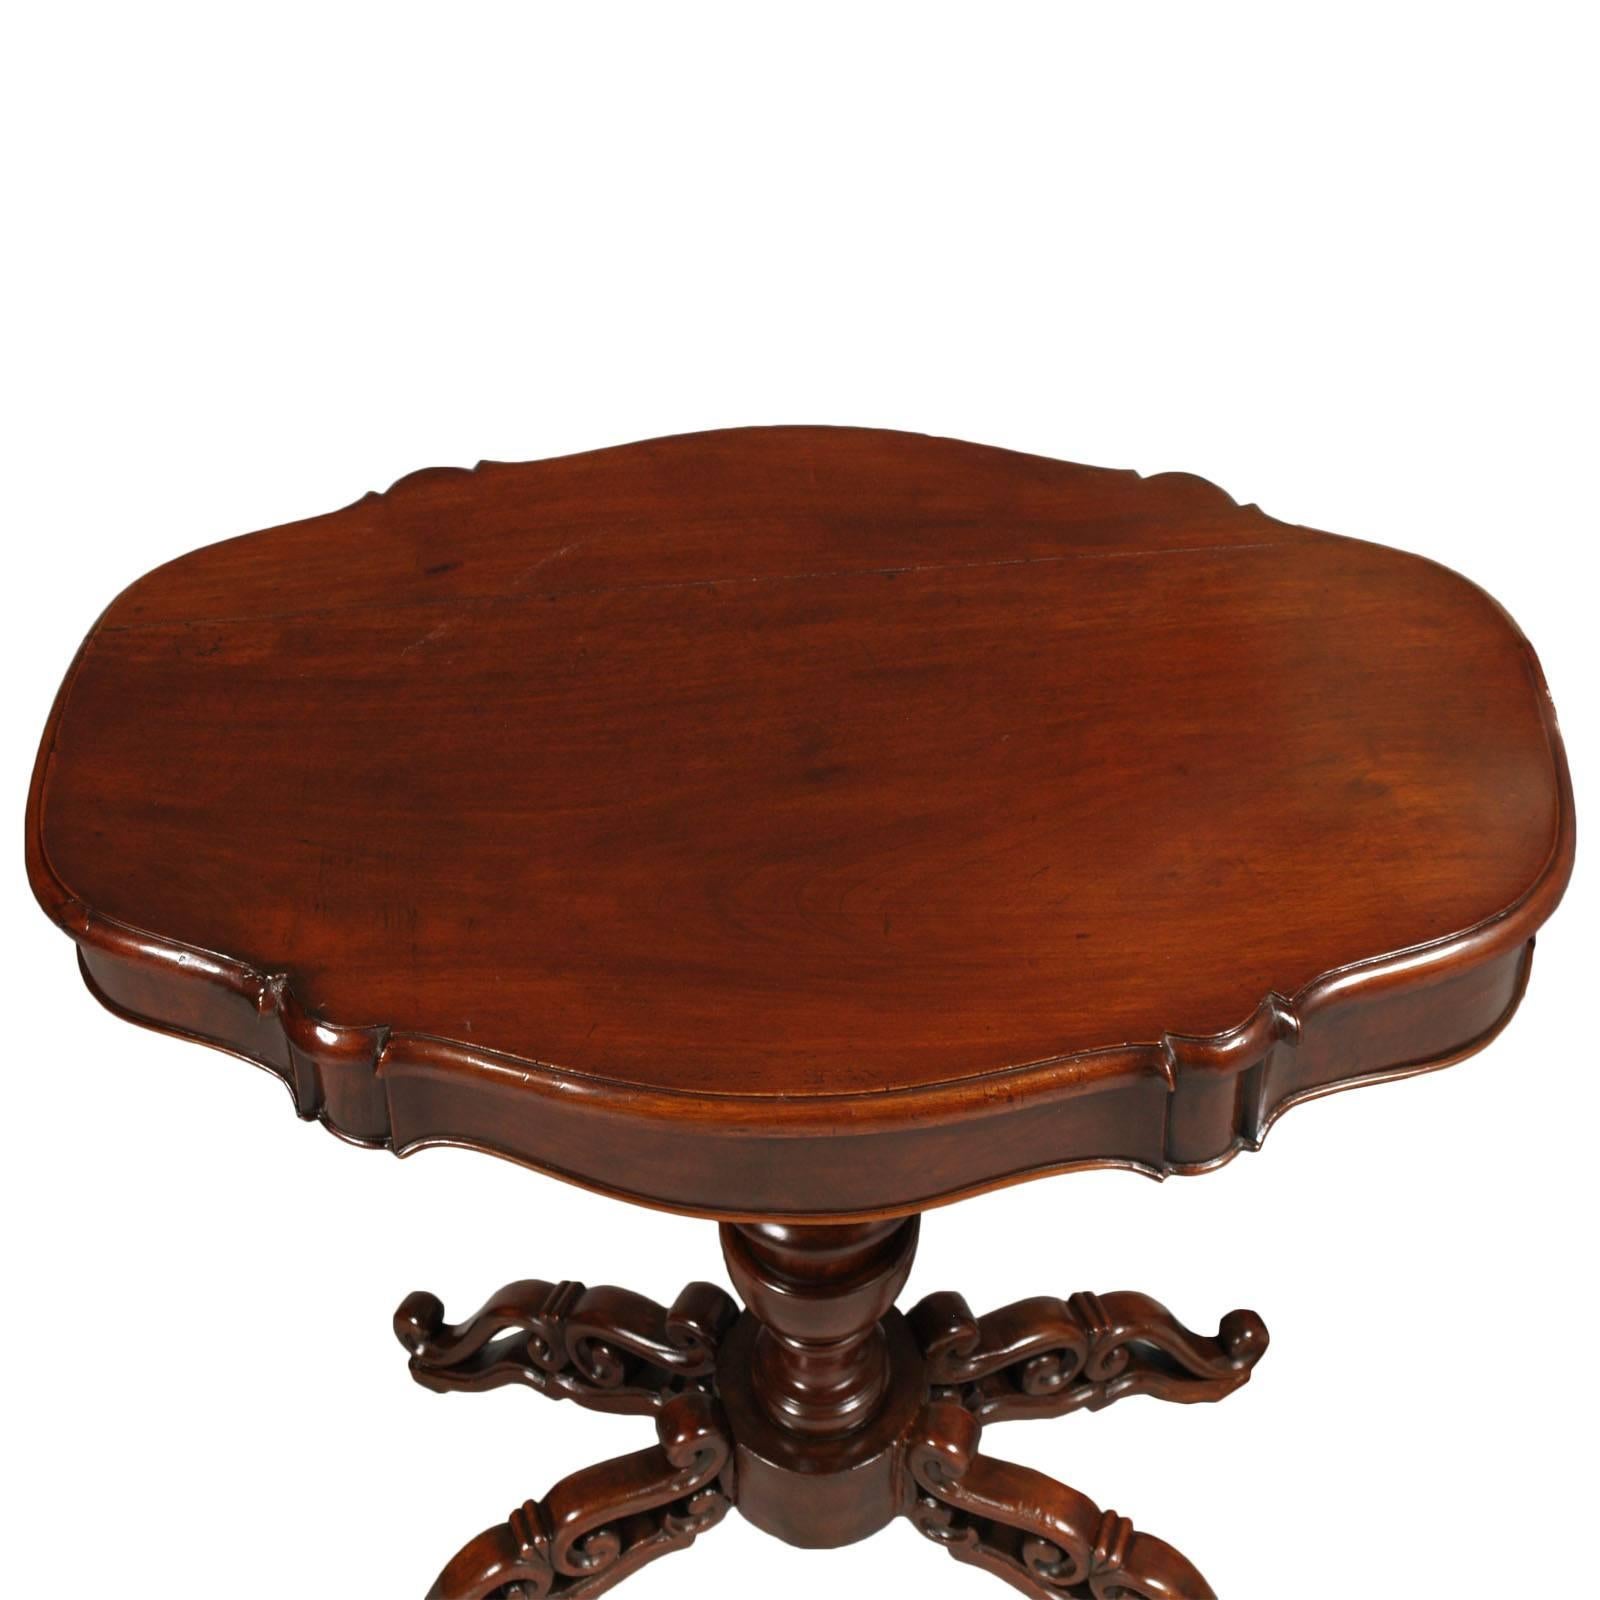 Italian Mid 18th Century Baroque Table , Carvet Walnut by Cucchi & Sola finished to wax For Sale